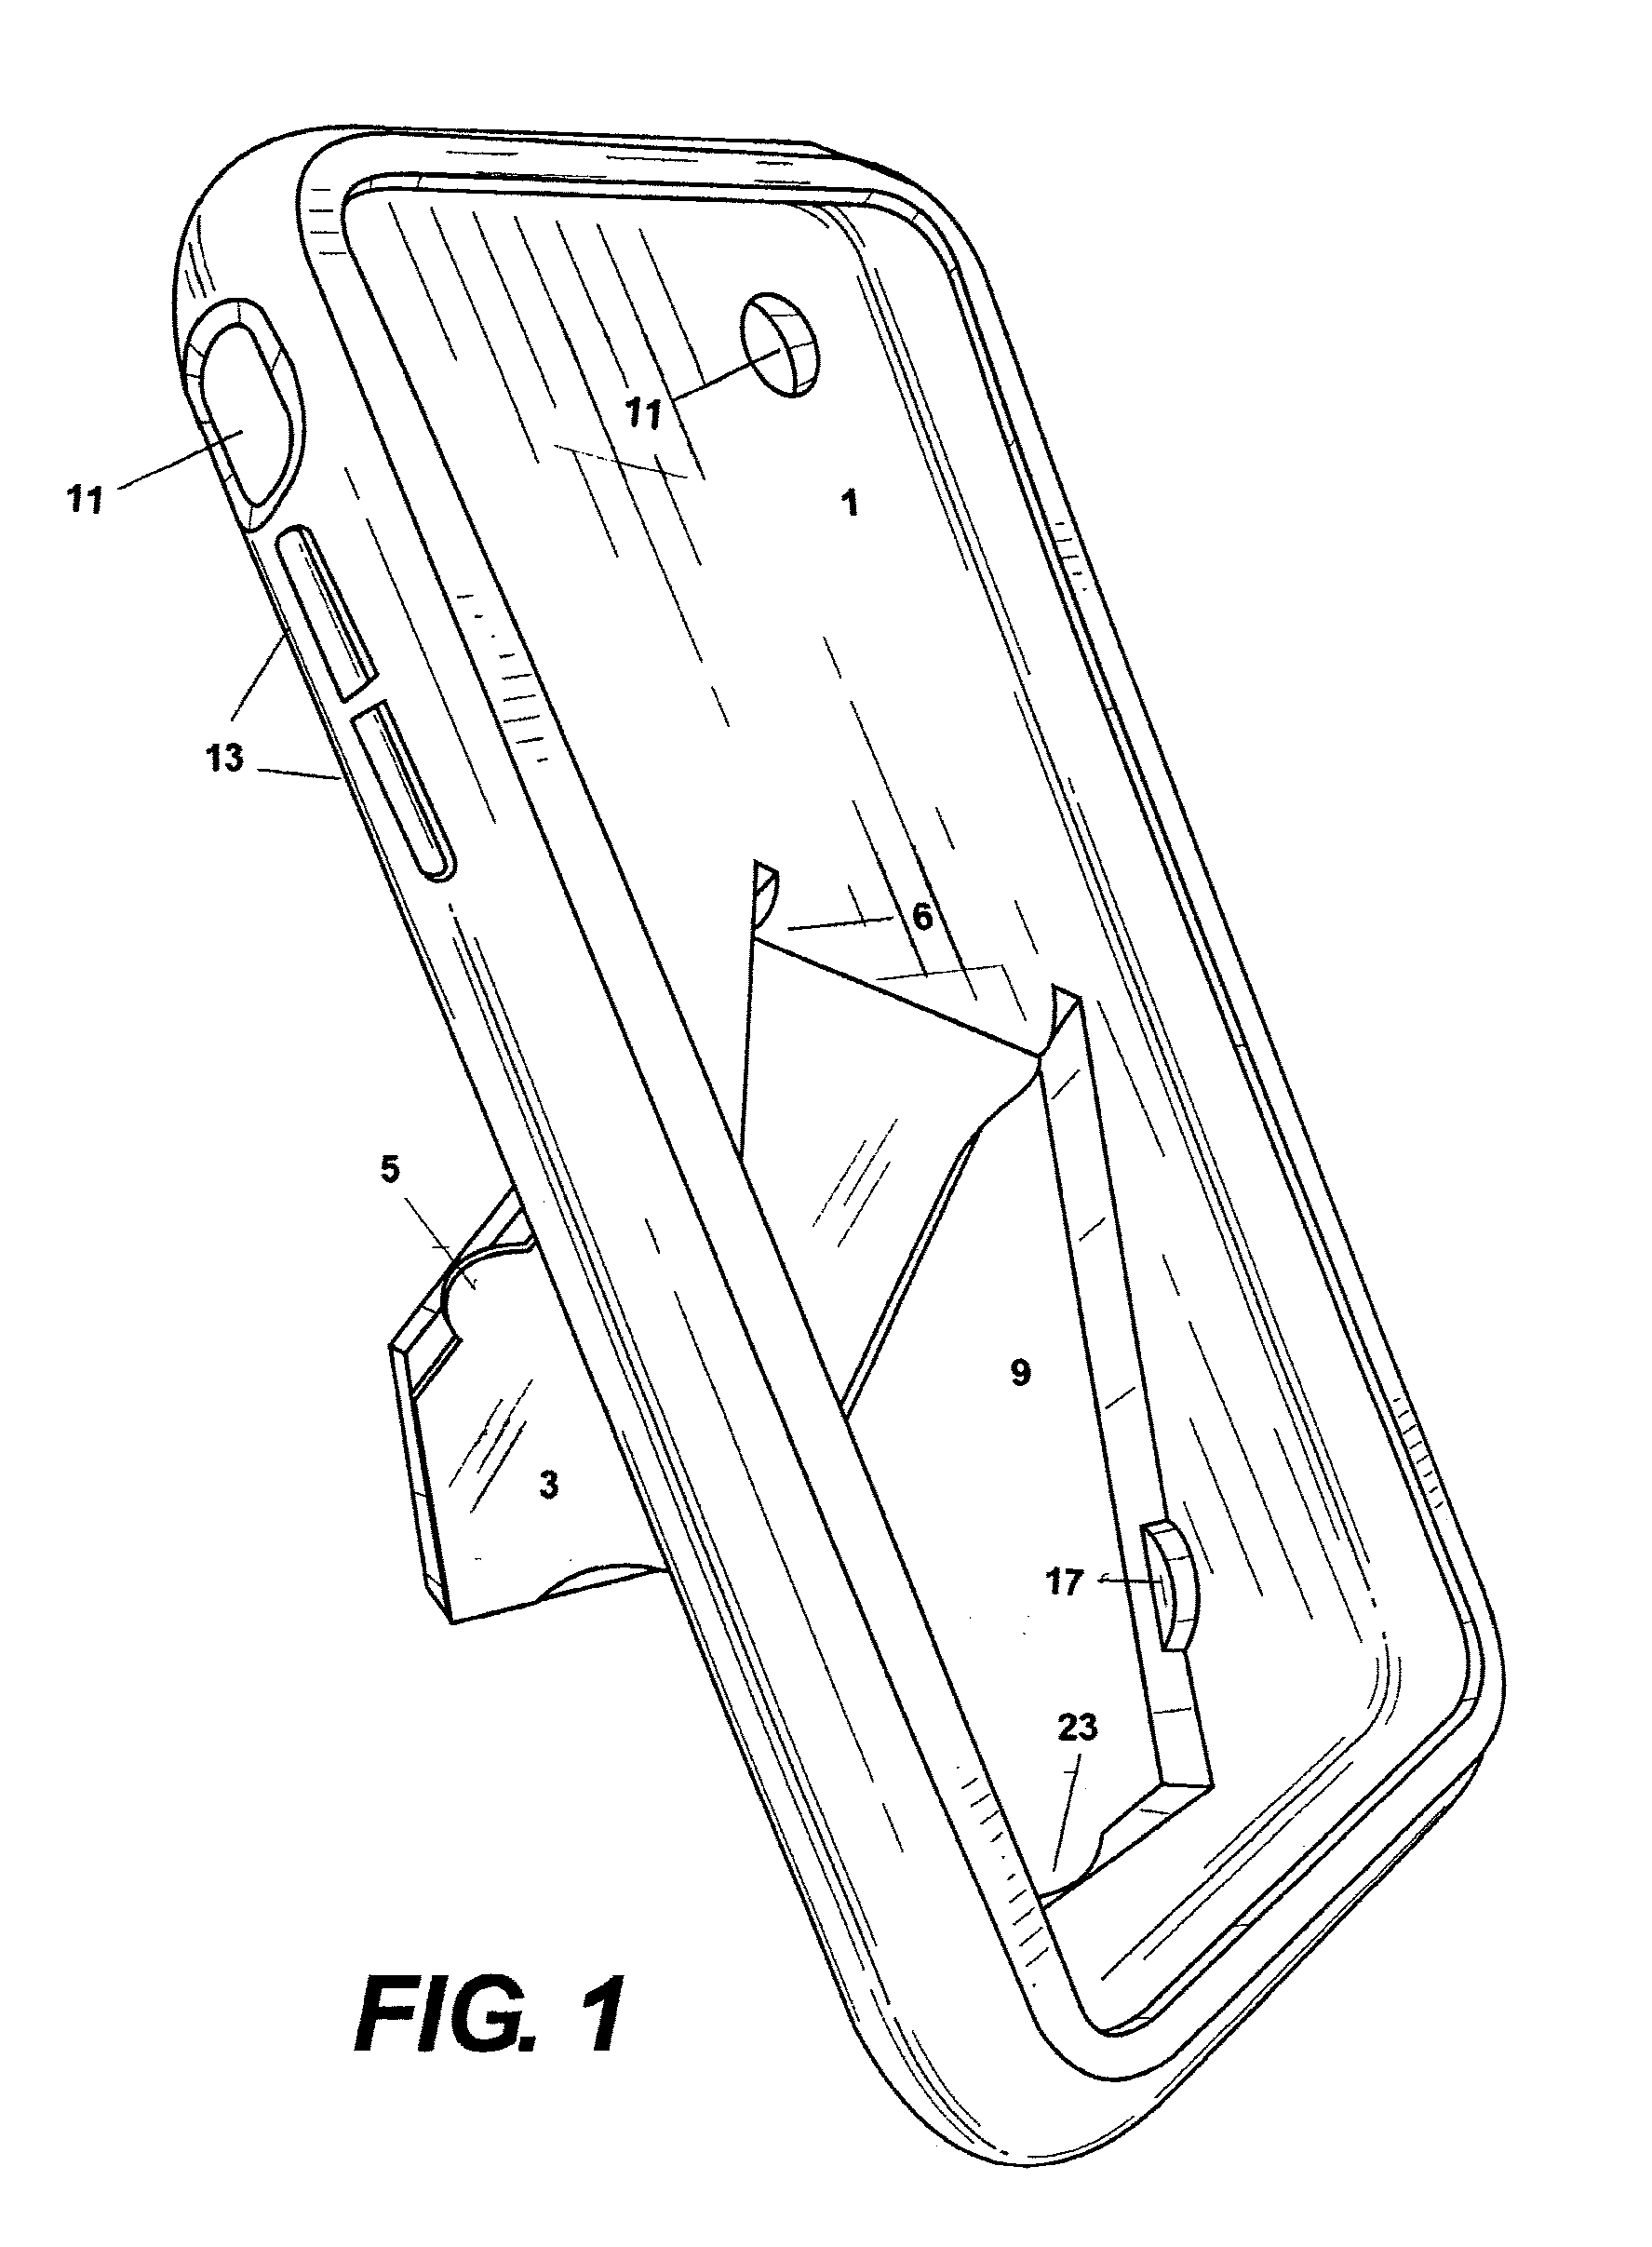 Integrated Frame/Stand for Portable Electronic Devices